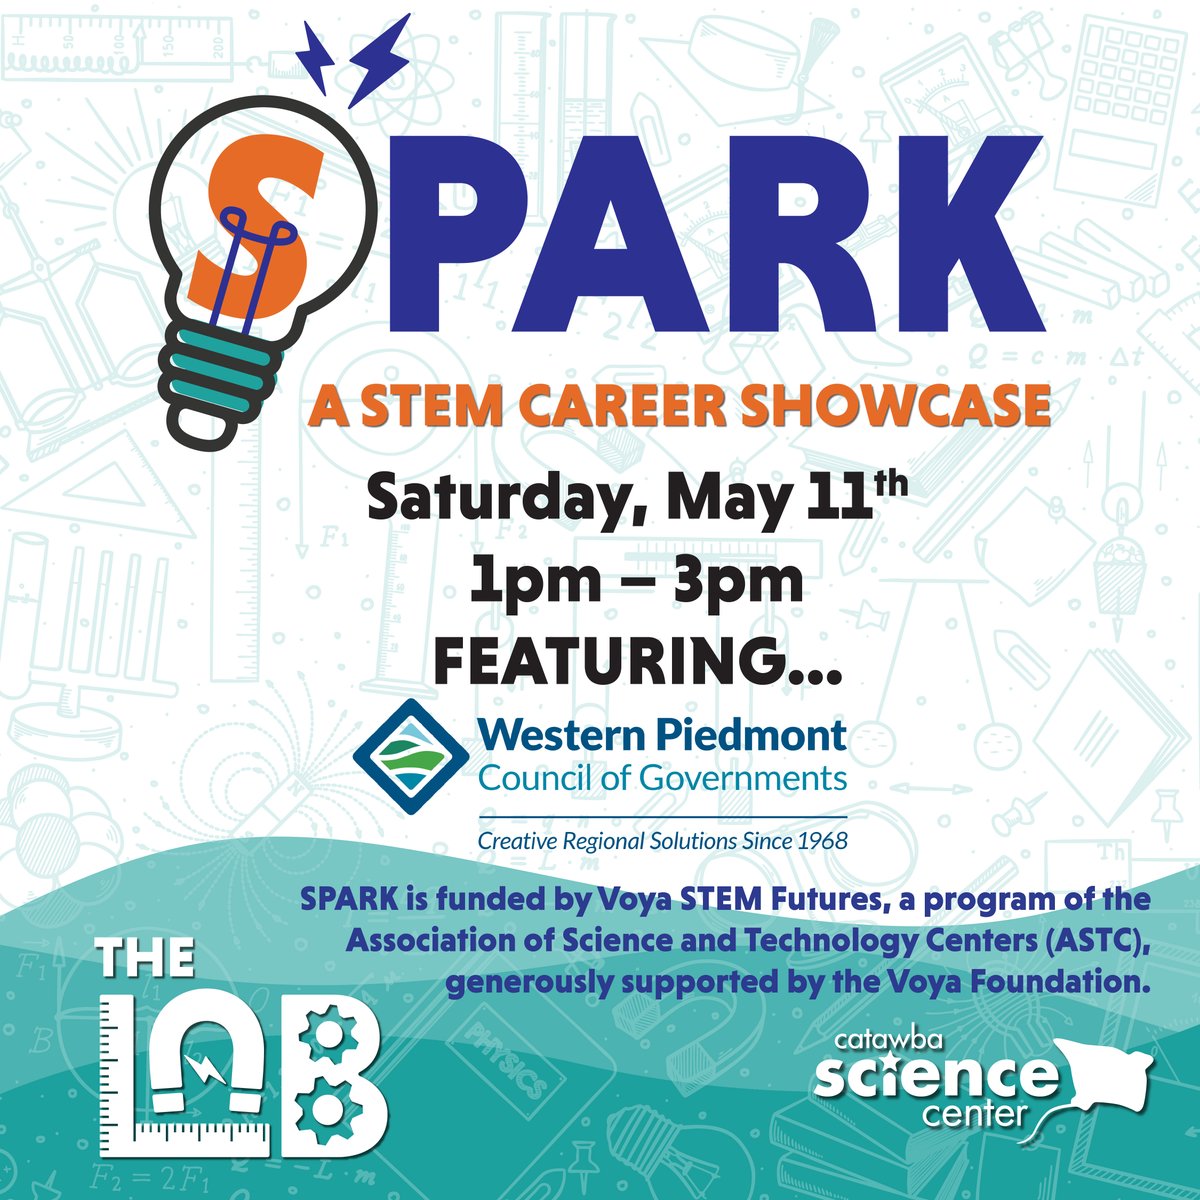 Don't miss our Spark event featuring Western Piedmont Council of Governments in the Foothills Collaboratory on May 11th from 1 - 3 PM! SPARK is a STEM career showcase featuring local industries in the Carolina Foothills. Participate in guided activities based on their careers.